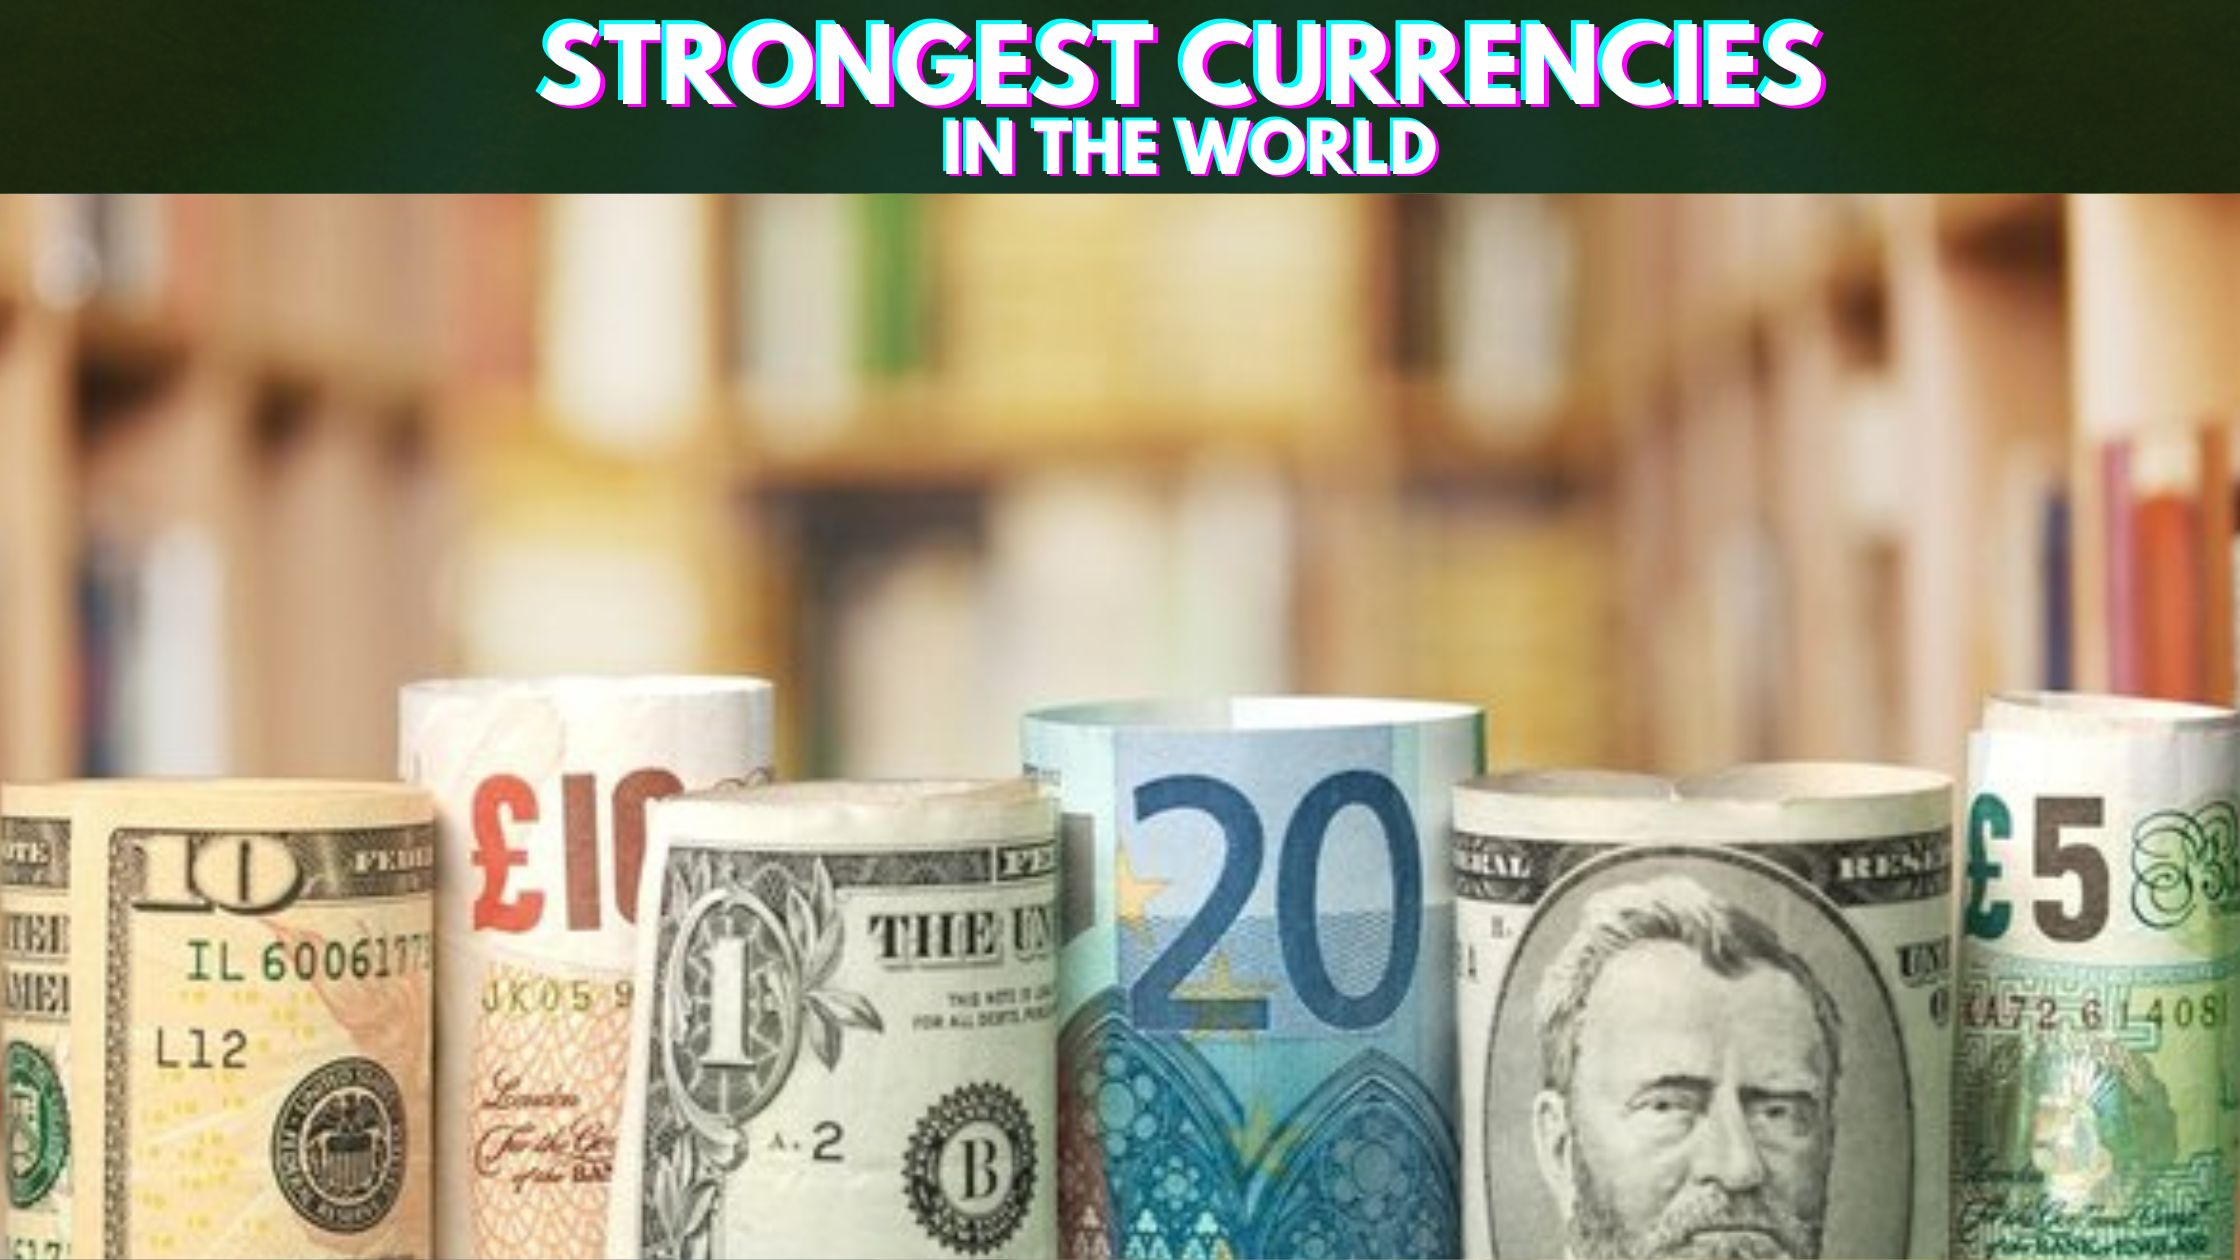 Top 10 Strongest Currencies In The World (2022)